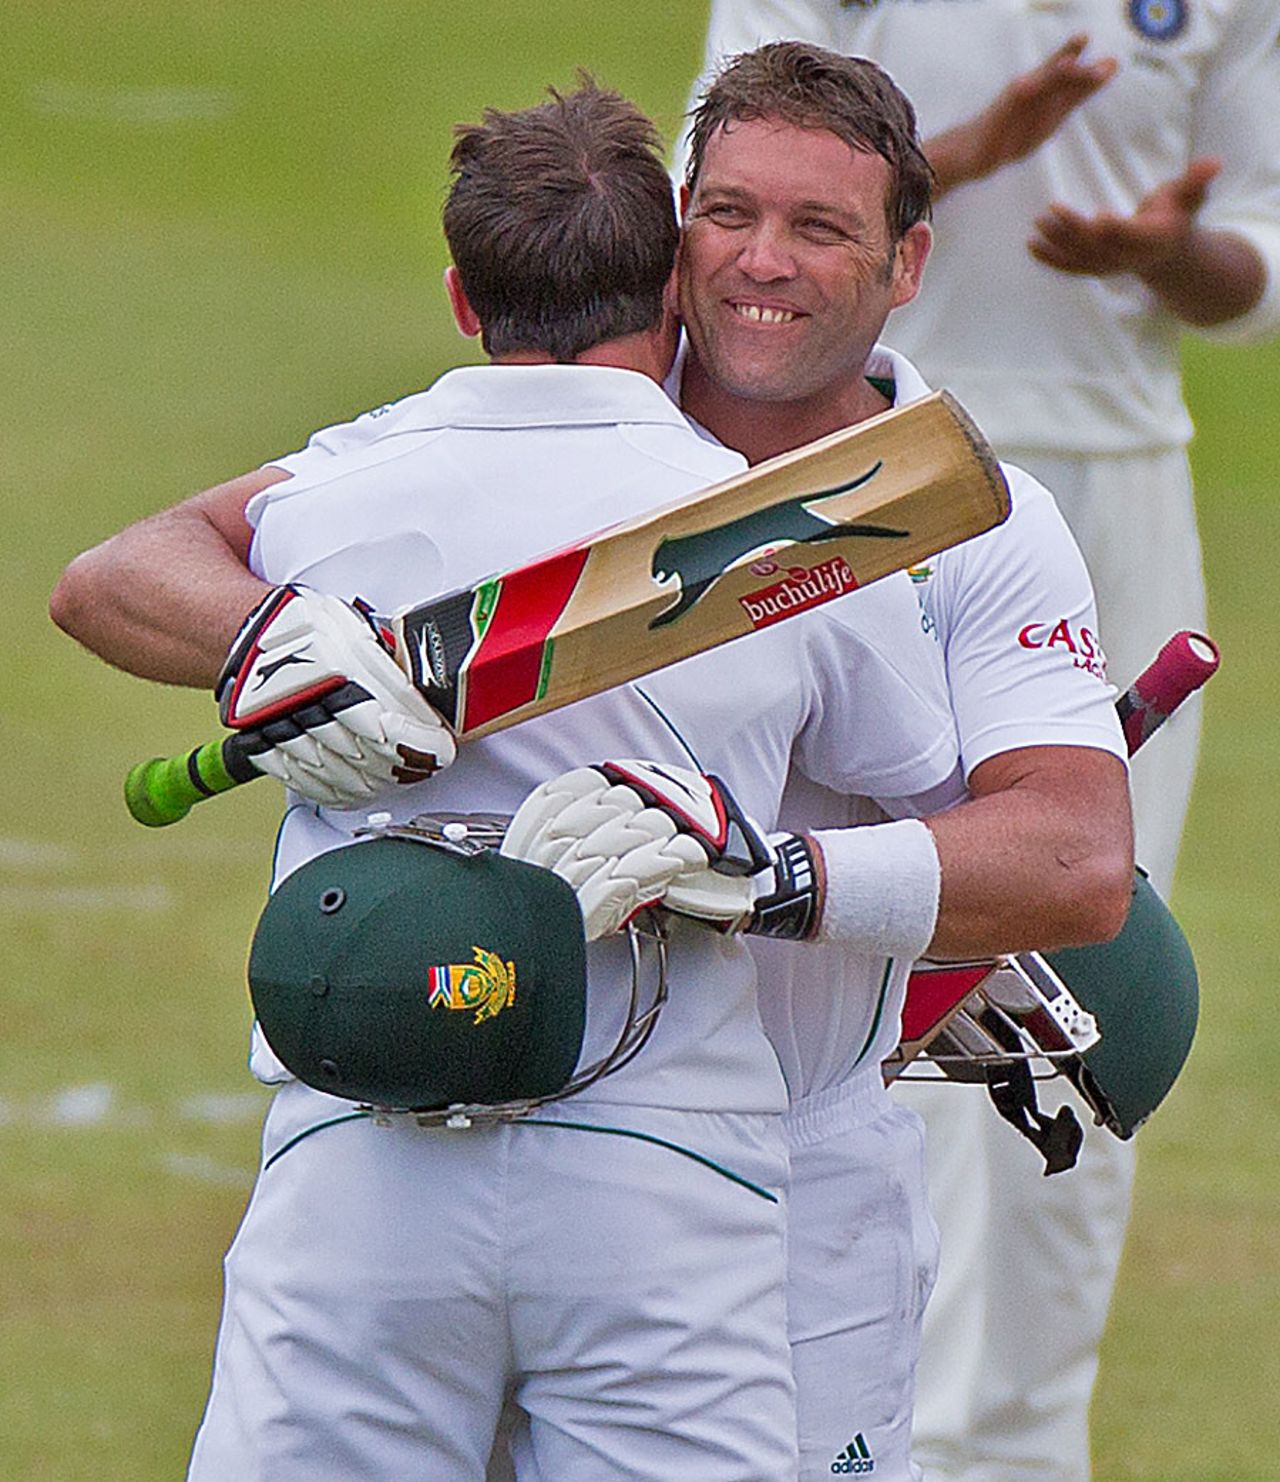 Jacques Kallis celebrates a century on his last Test, South Africa v India, 2nd Test, Durban, 4th day, December 29, 2013